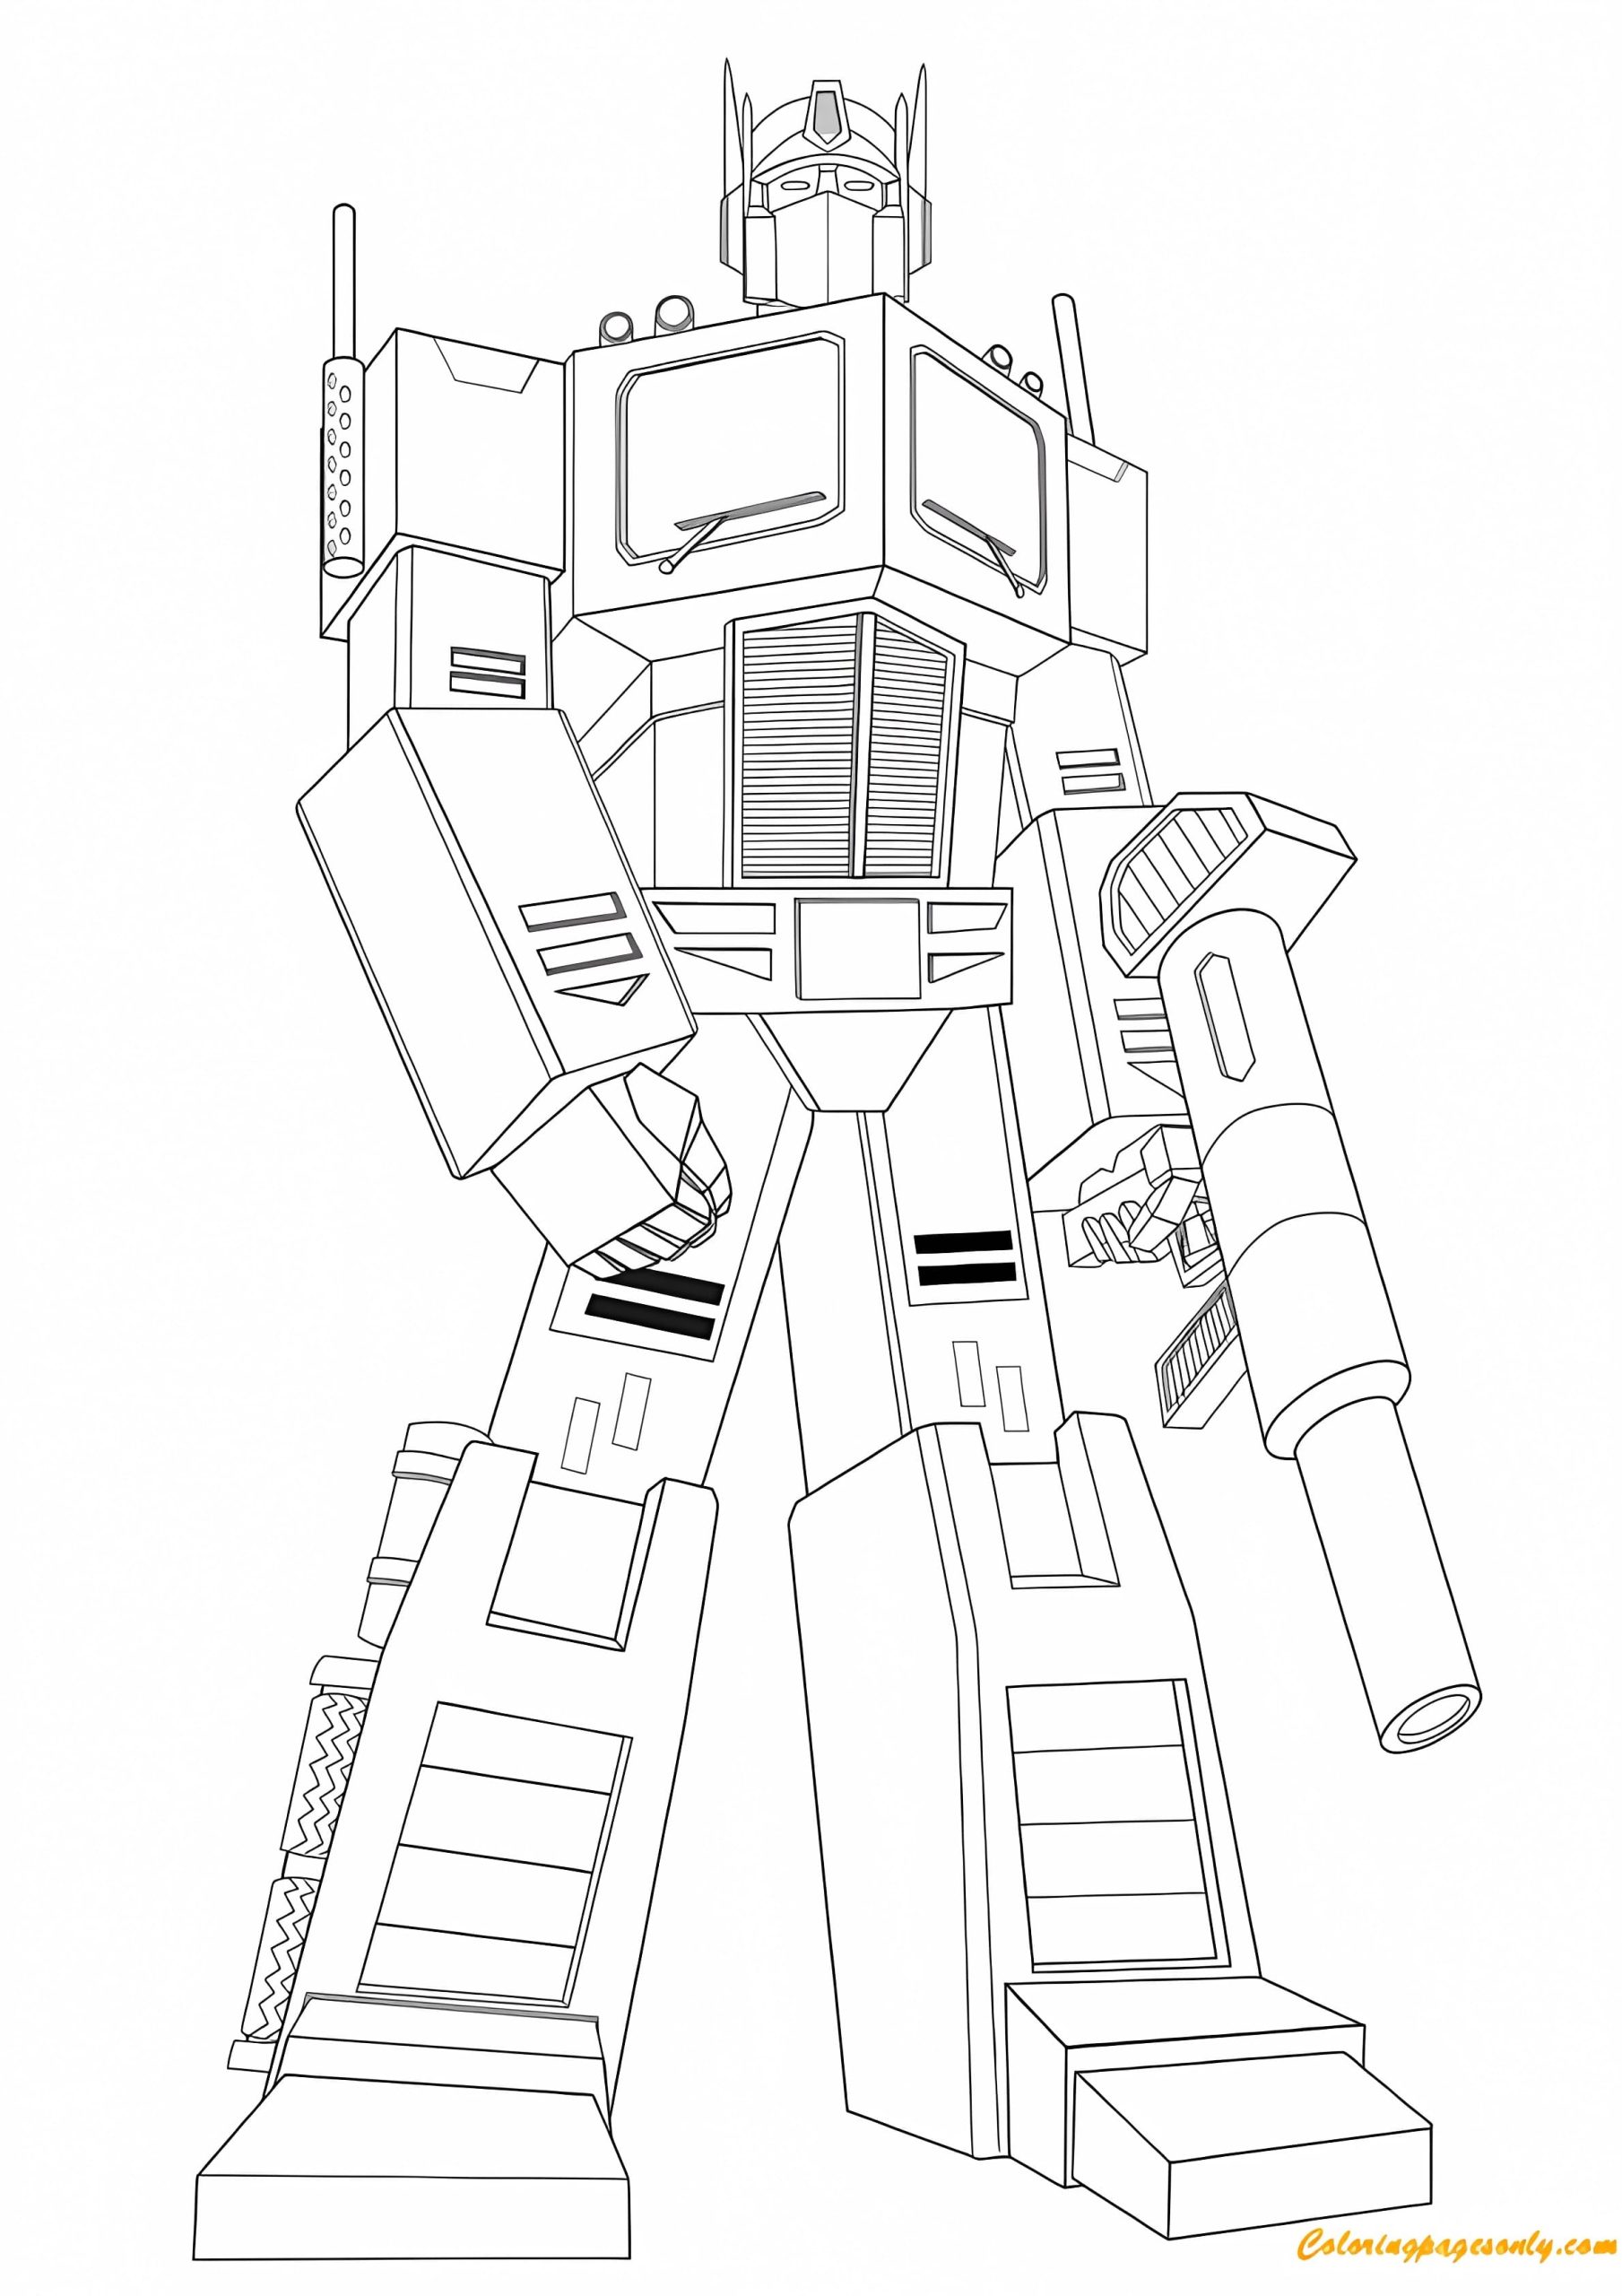 Transformers Ironhide Hold Gun Coloring Page